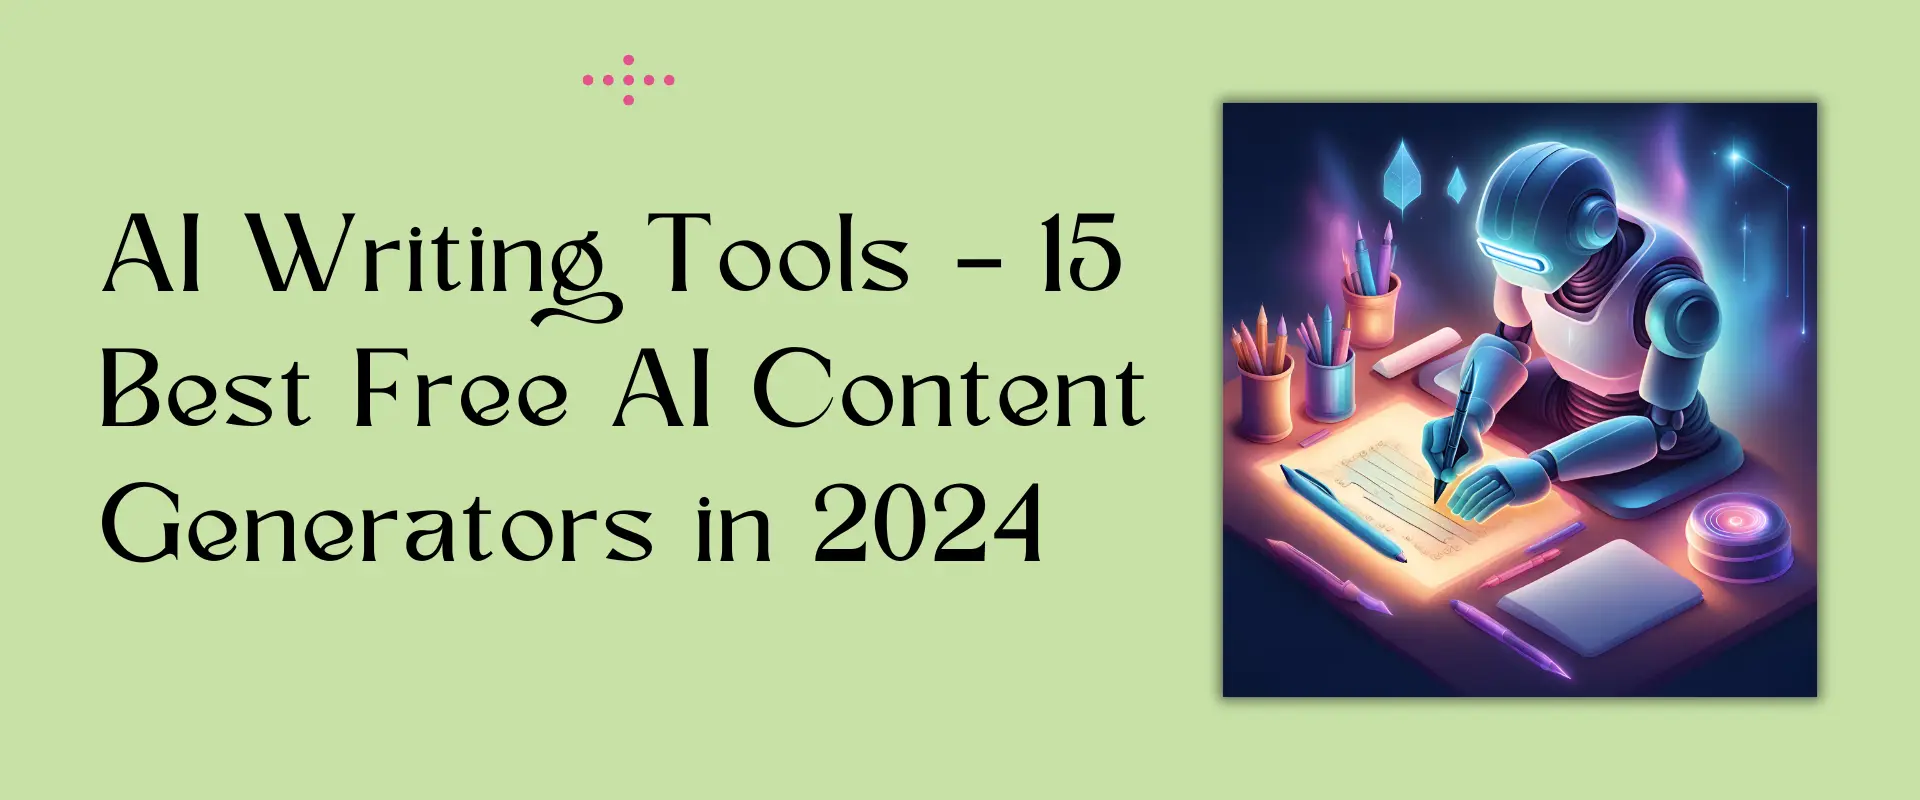 AI Writing Tools – 15 Best Free AI Content Generators in 2024